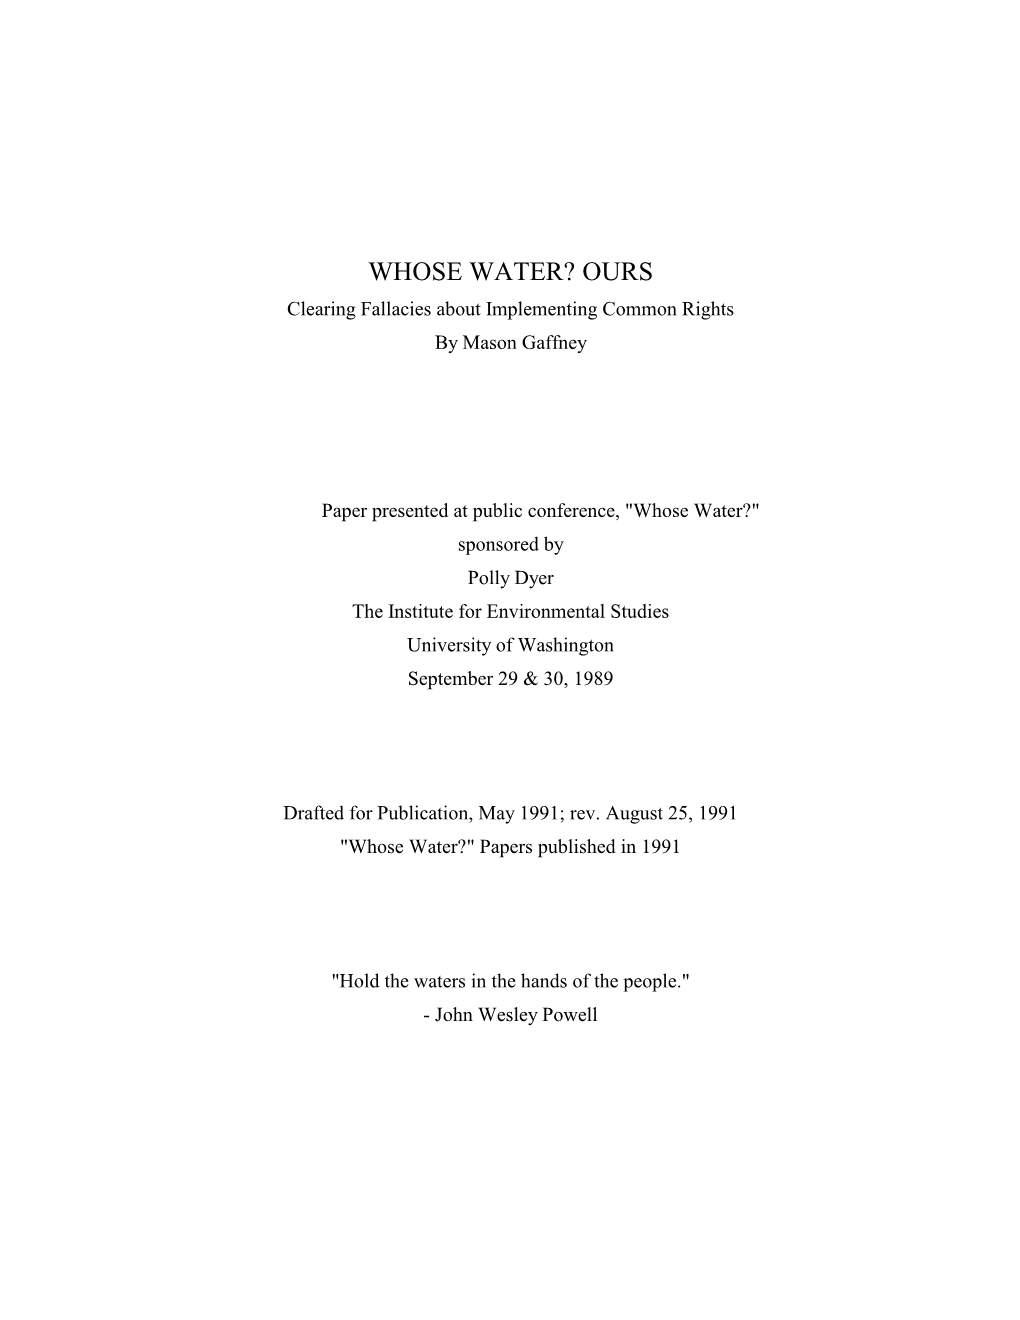 WHOSE WATER? OURS Clearing Fallacies About Implementing Common Rights by Mason Gaffney